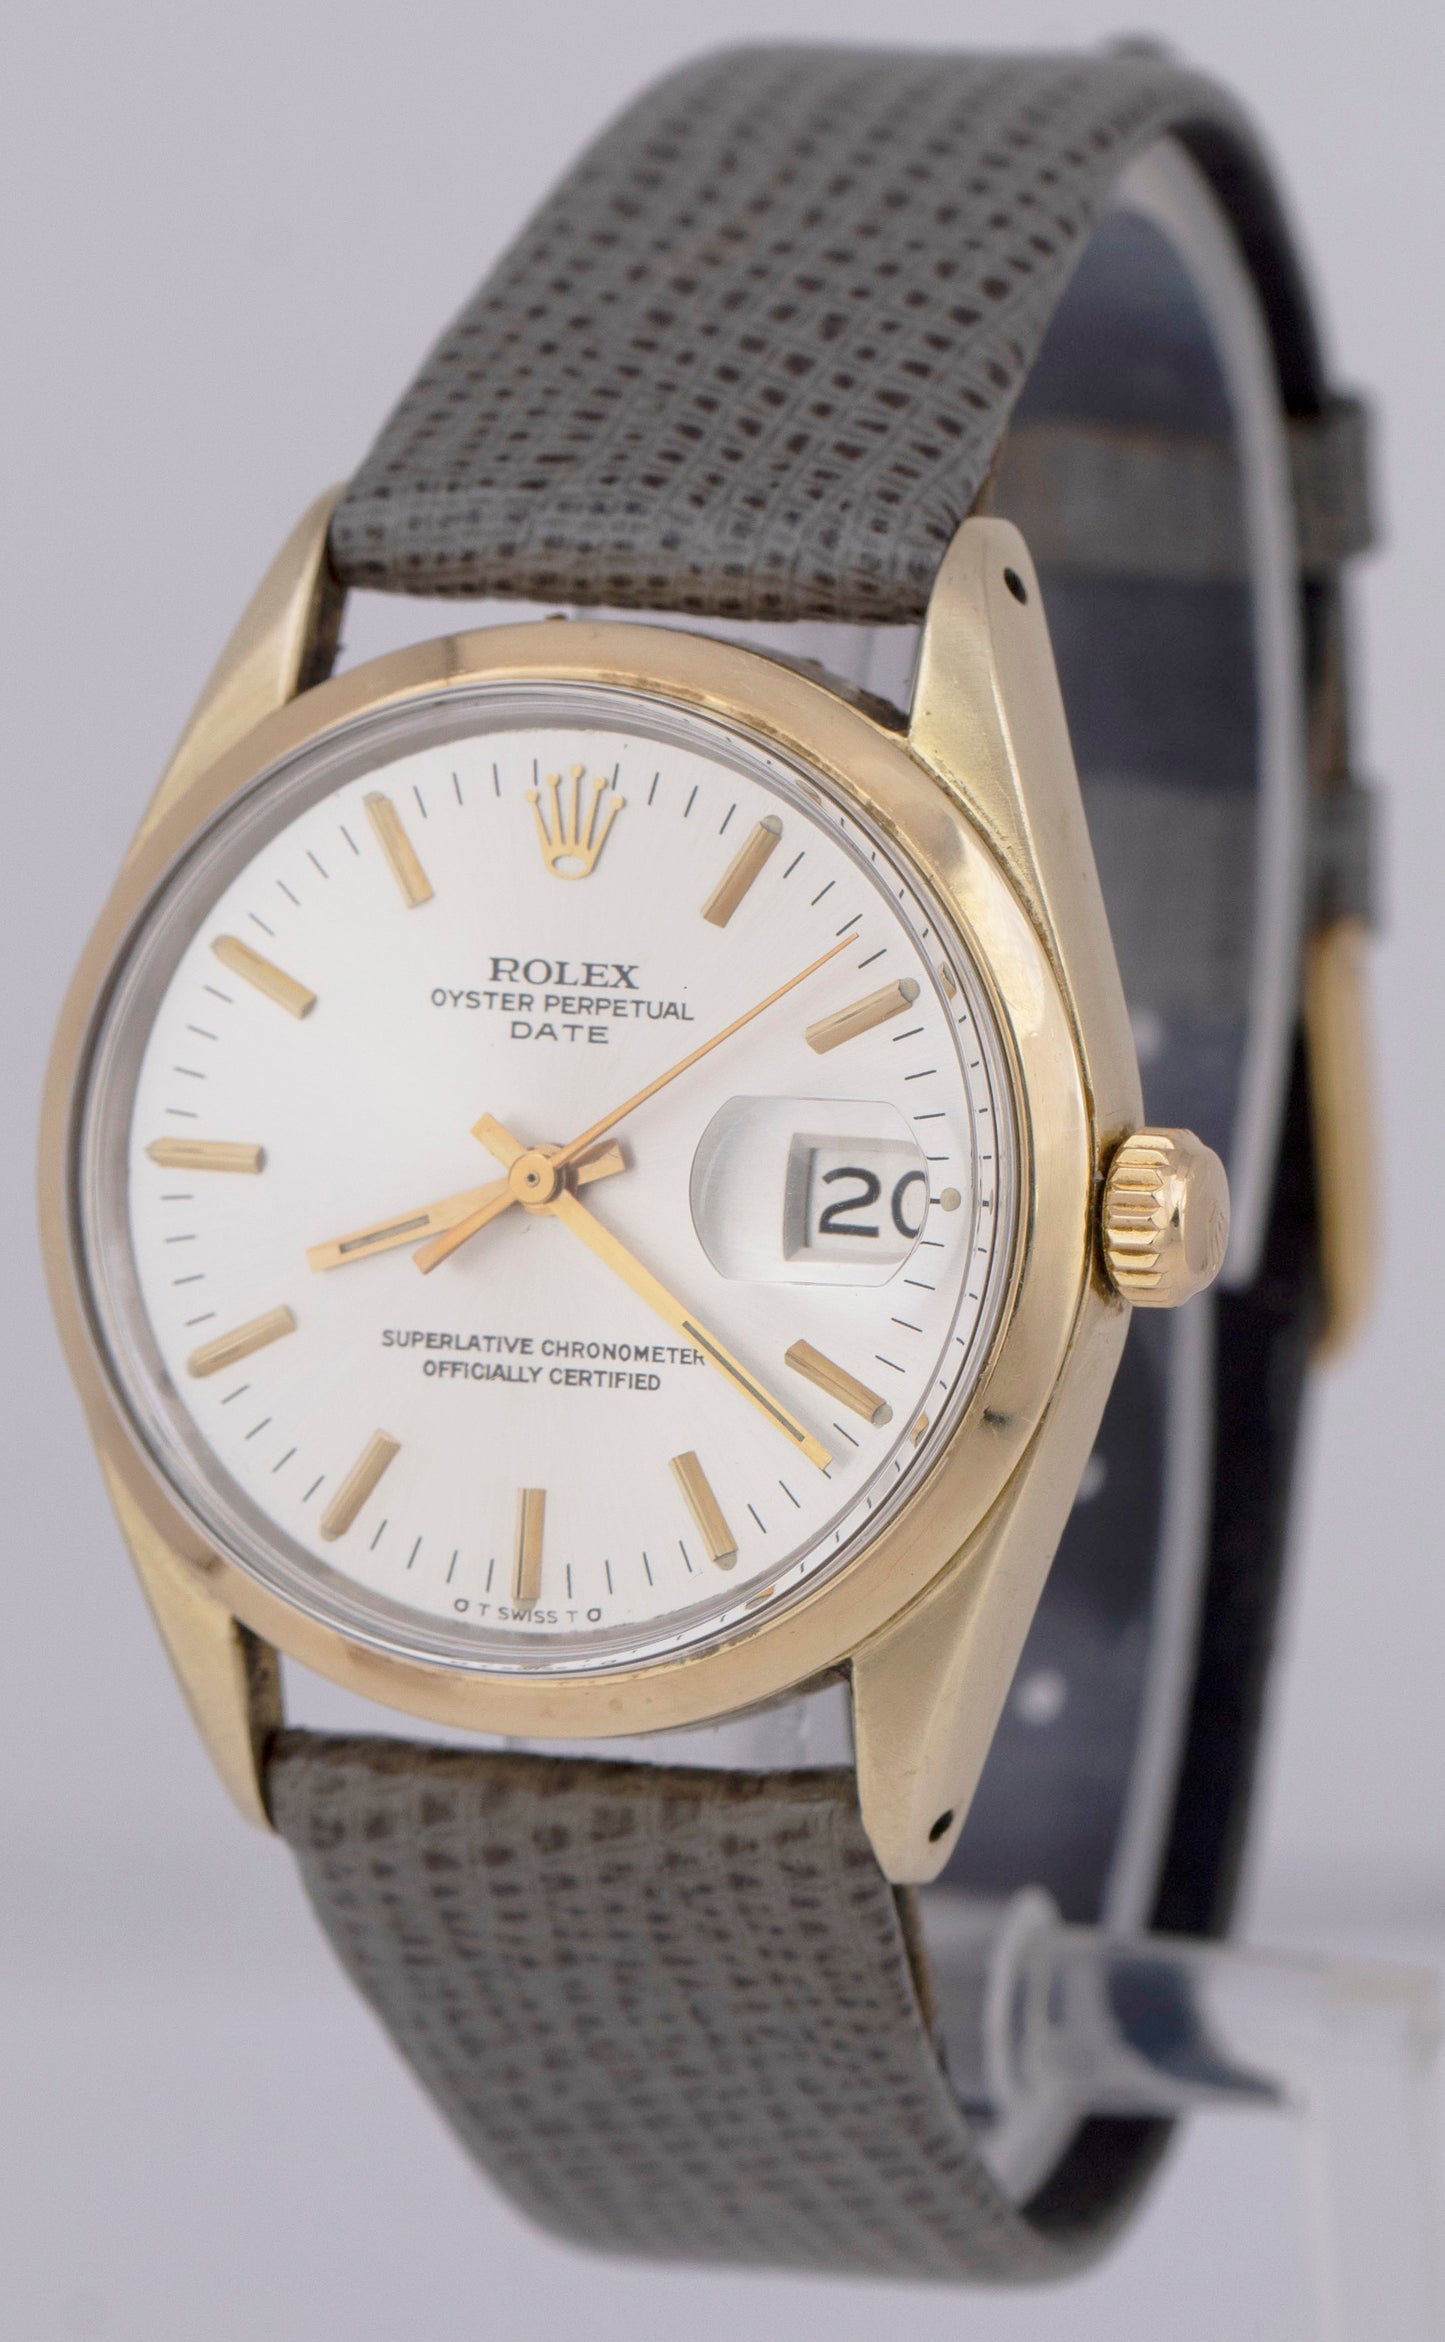 1973 Gold Shell Rolex Oyster Perpetual Date 34mm Silver Sigma Auto Watch 1550